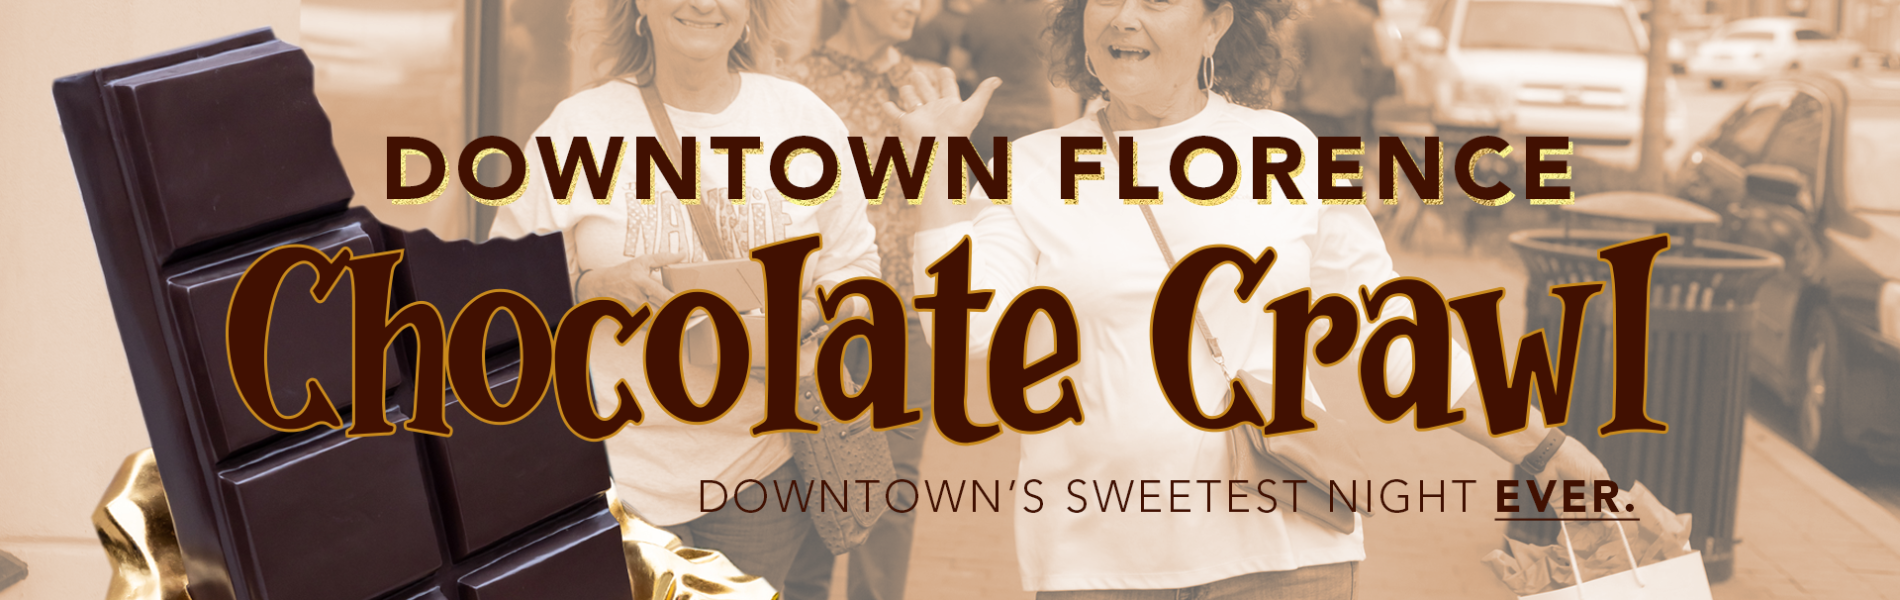 Downtown Chocolate Crawl text and women having fun in the background.